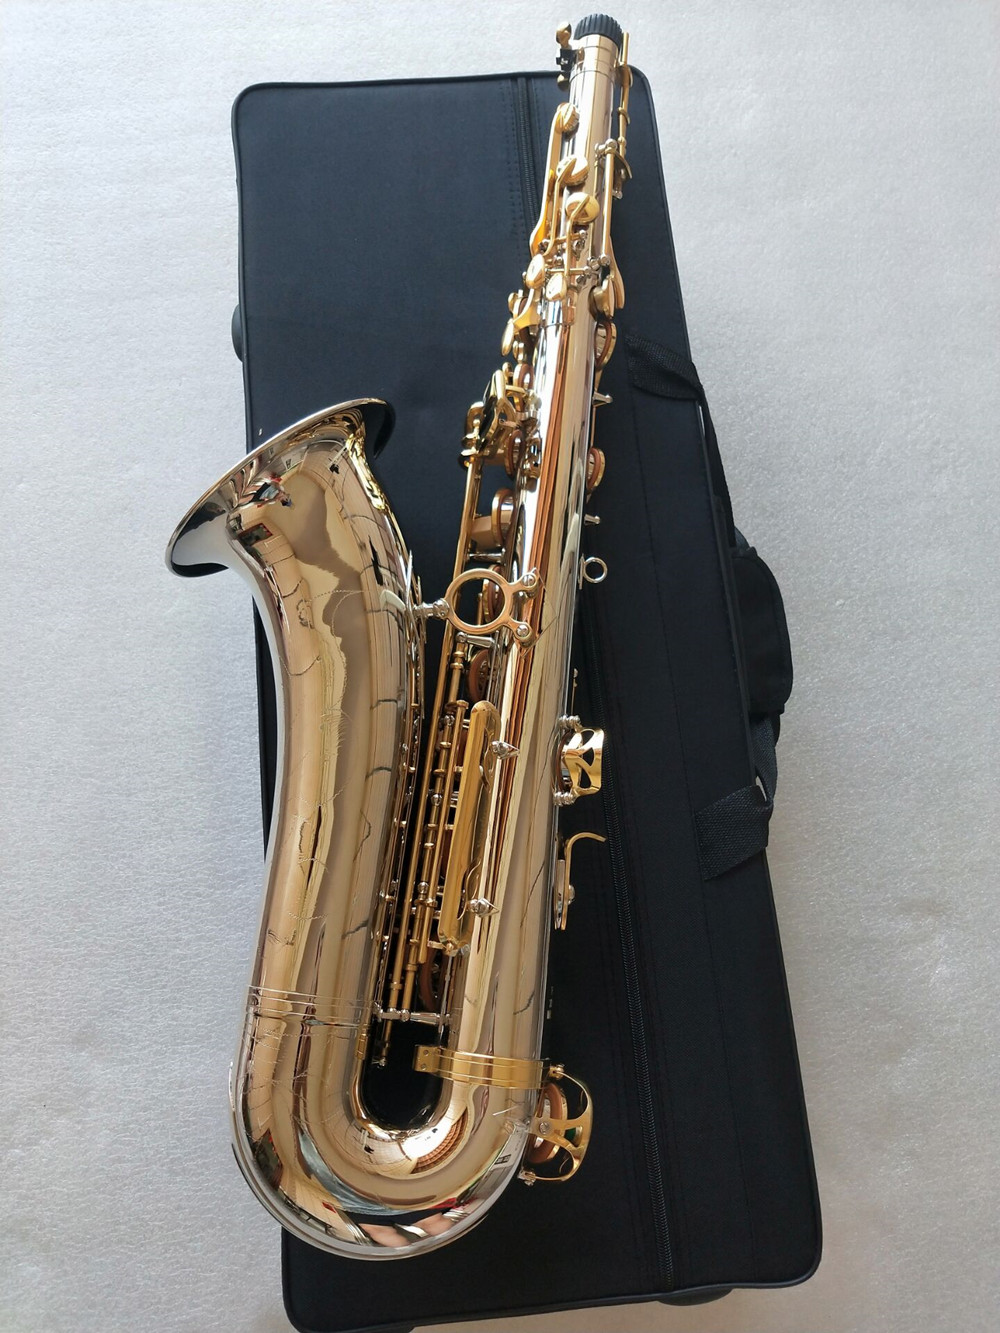 Top JapanT-W037 Saxophone High Quality Tenor Saxophone Instruments Nickel Plated Brass Professional level